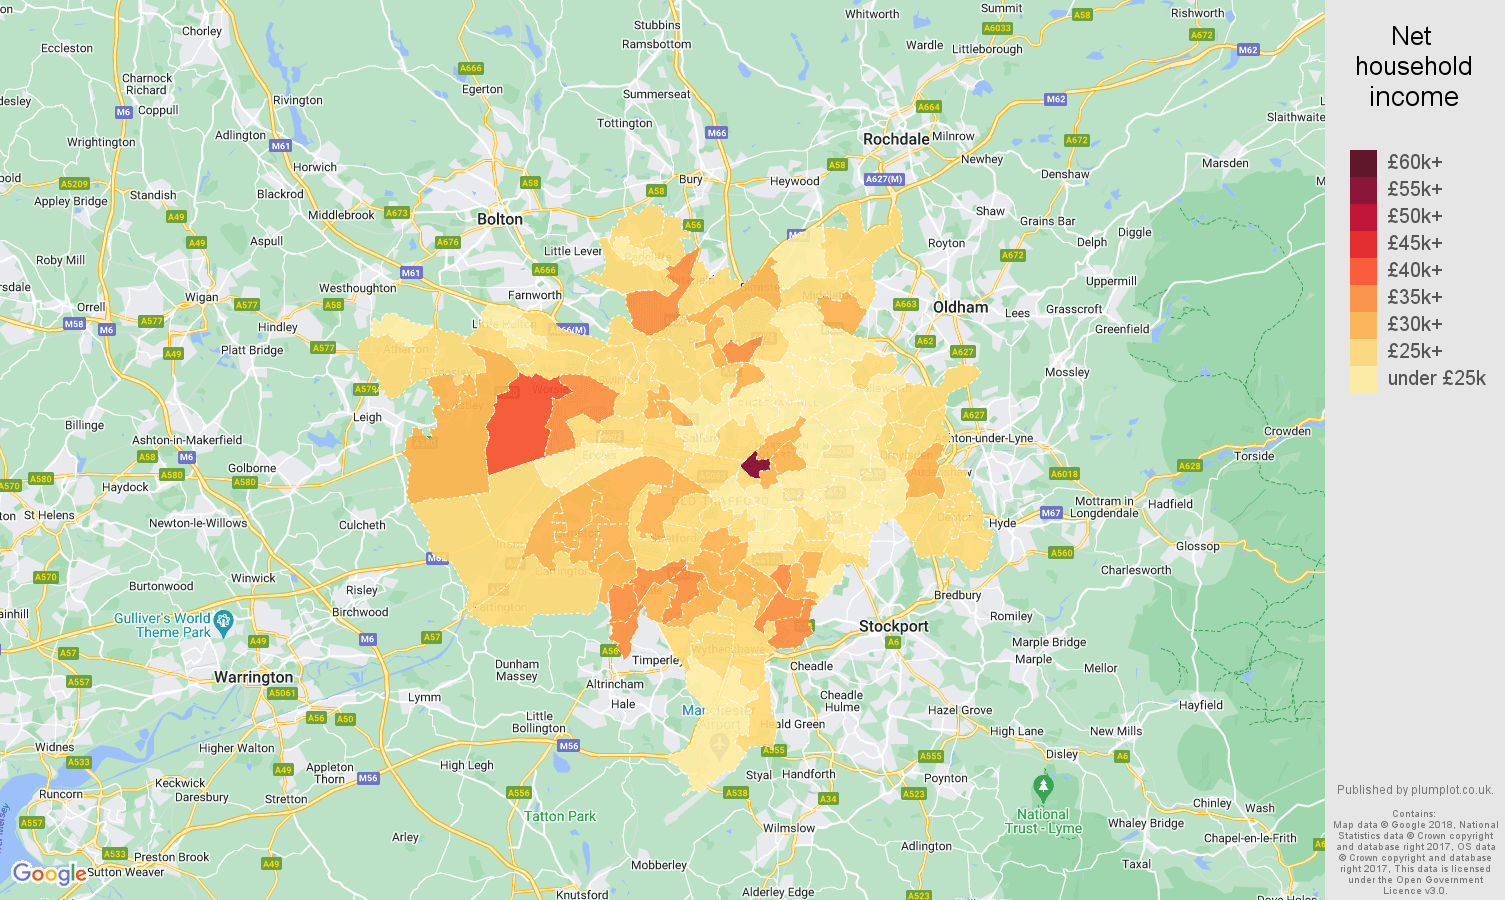 Manchester net household income map